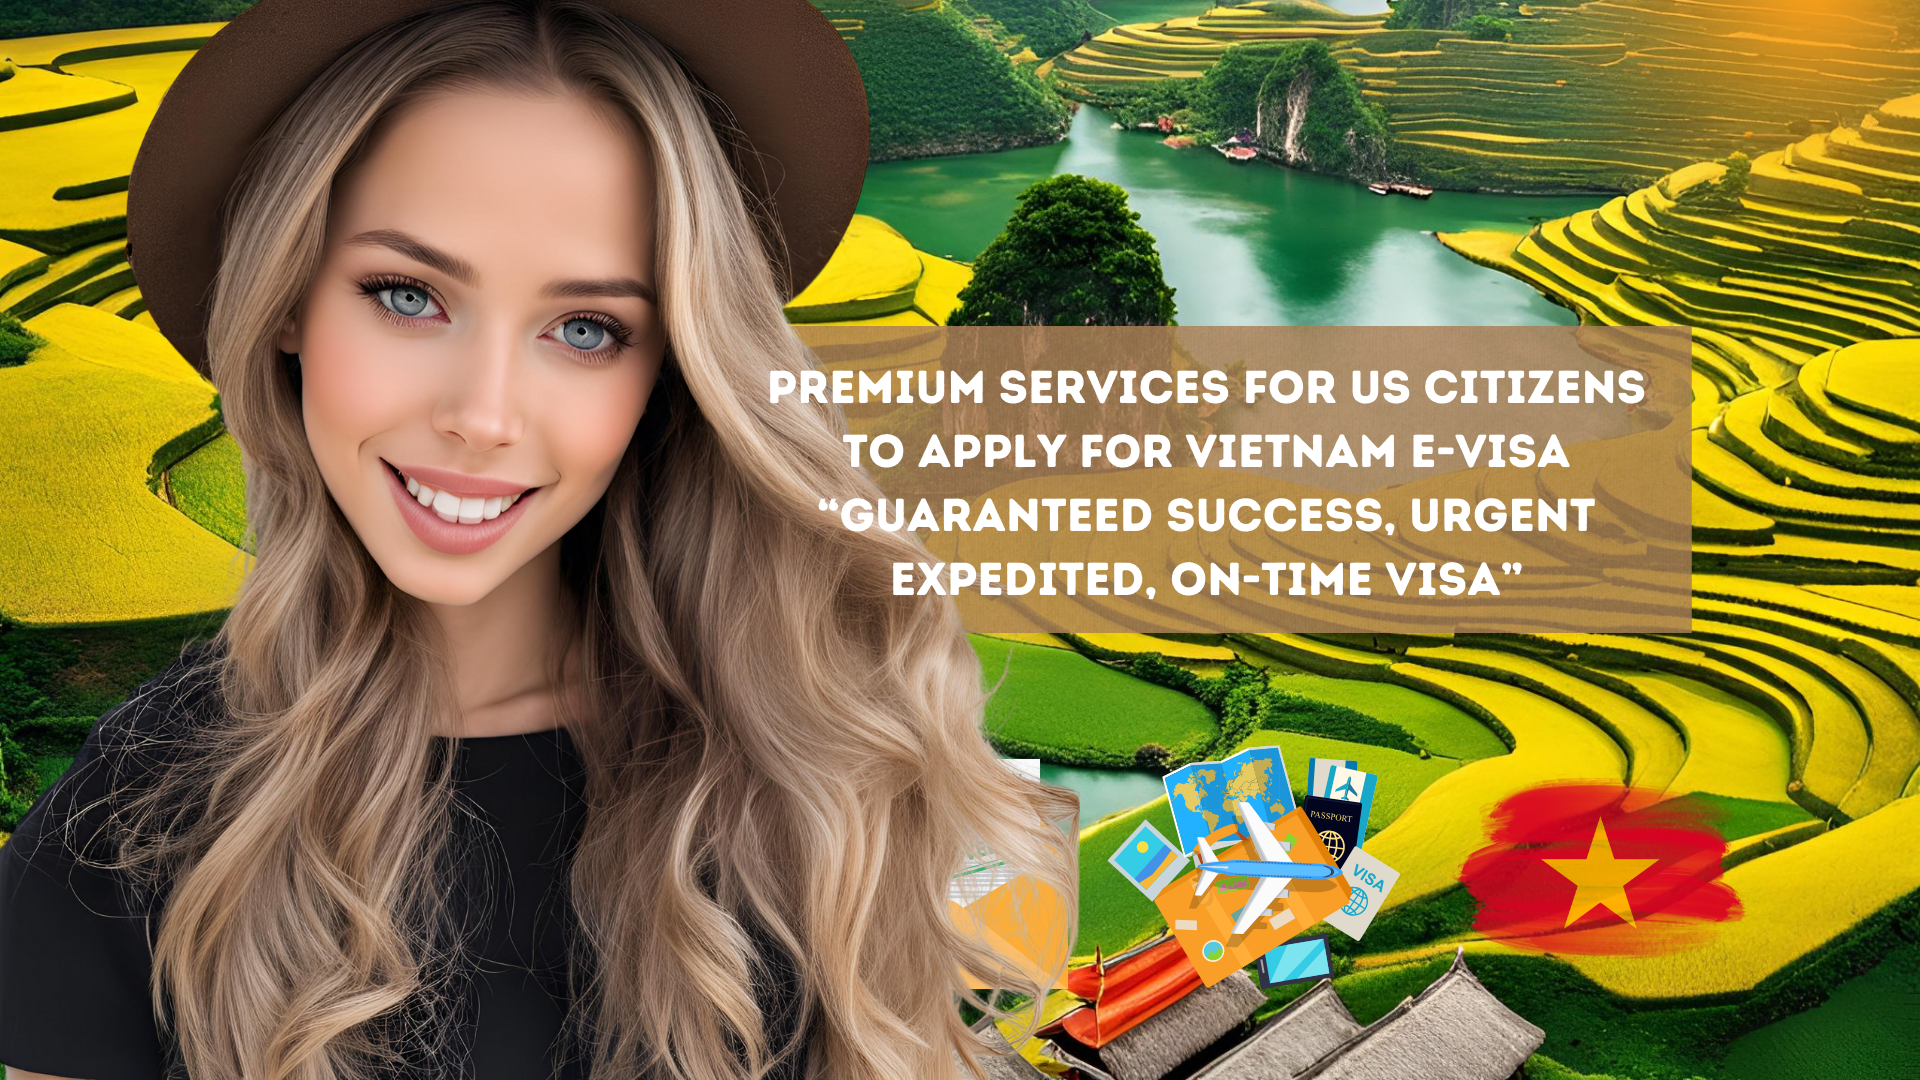 Premium Services for US Citizens to apply for Vietnam e-visa “Guaranteed success, urgent expedited, on-time visa”